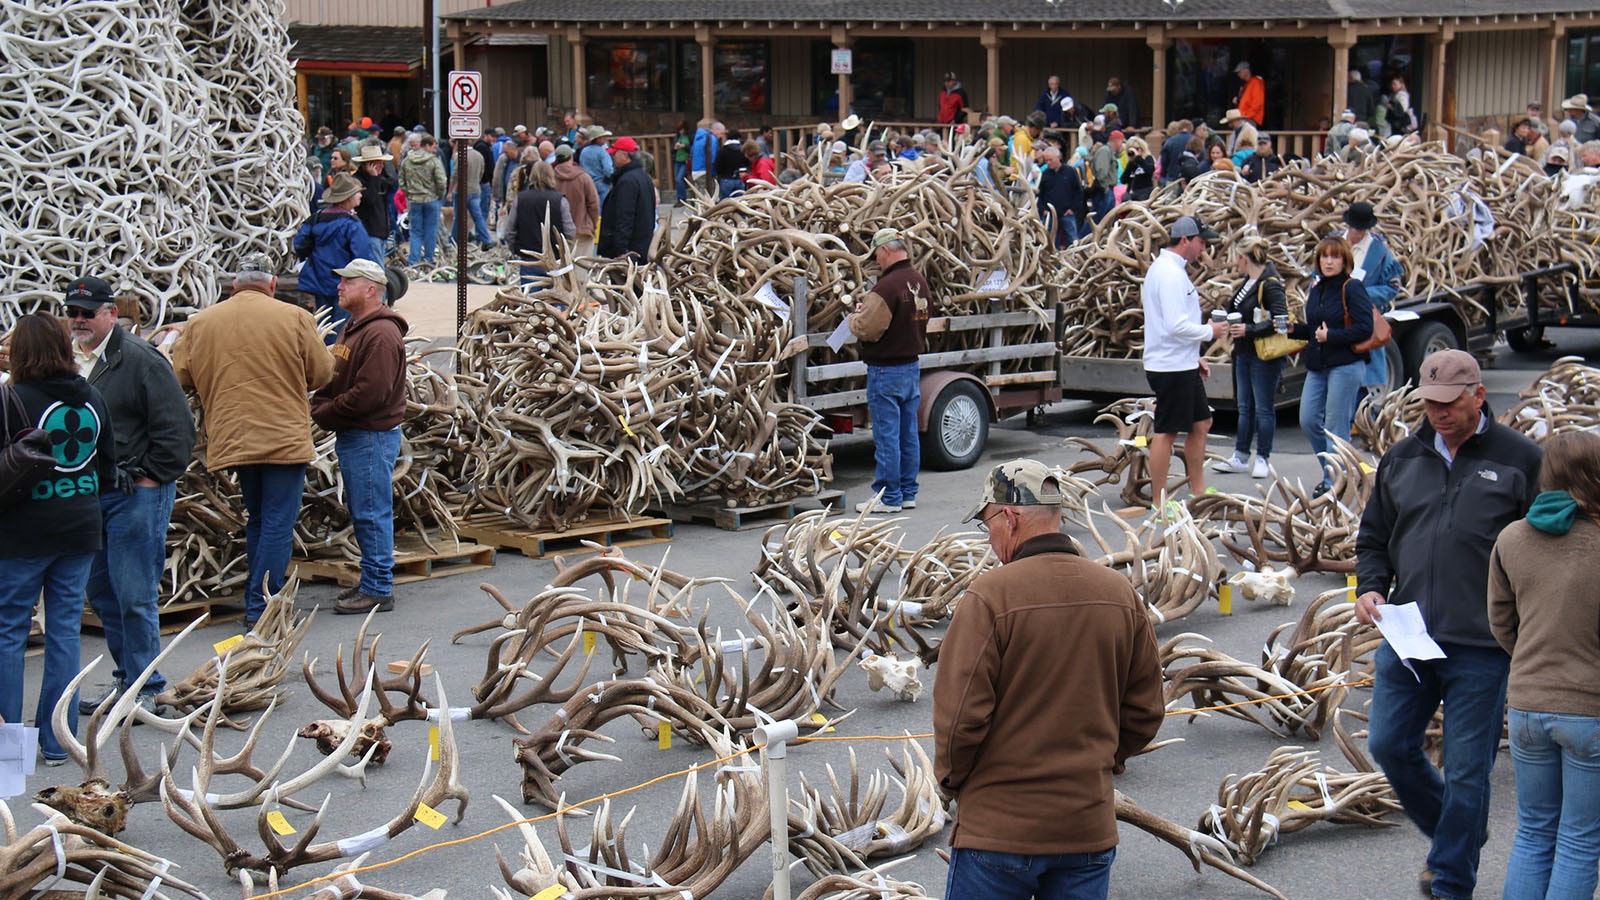 Prospective bidders and spectators have a chance to preview the lots prior to the start of the annual ElkFest auction in Jackson, Wyoming.